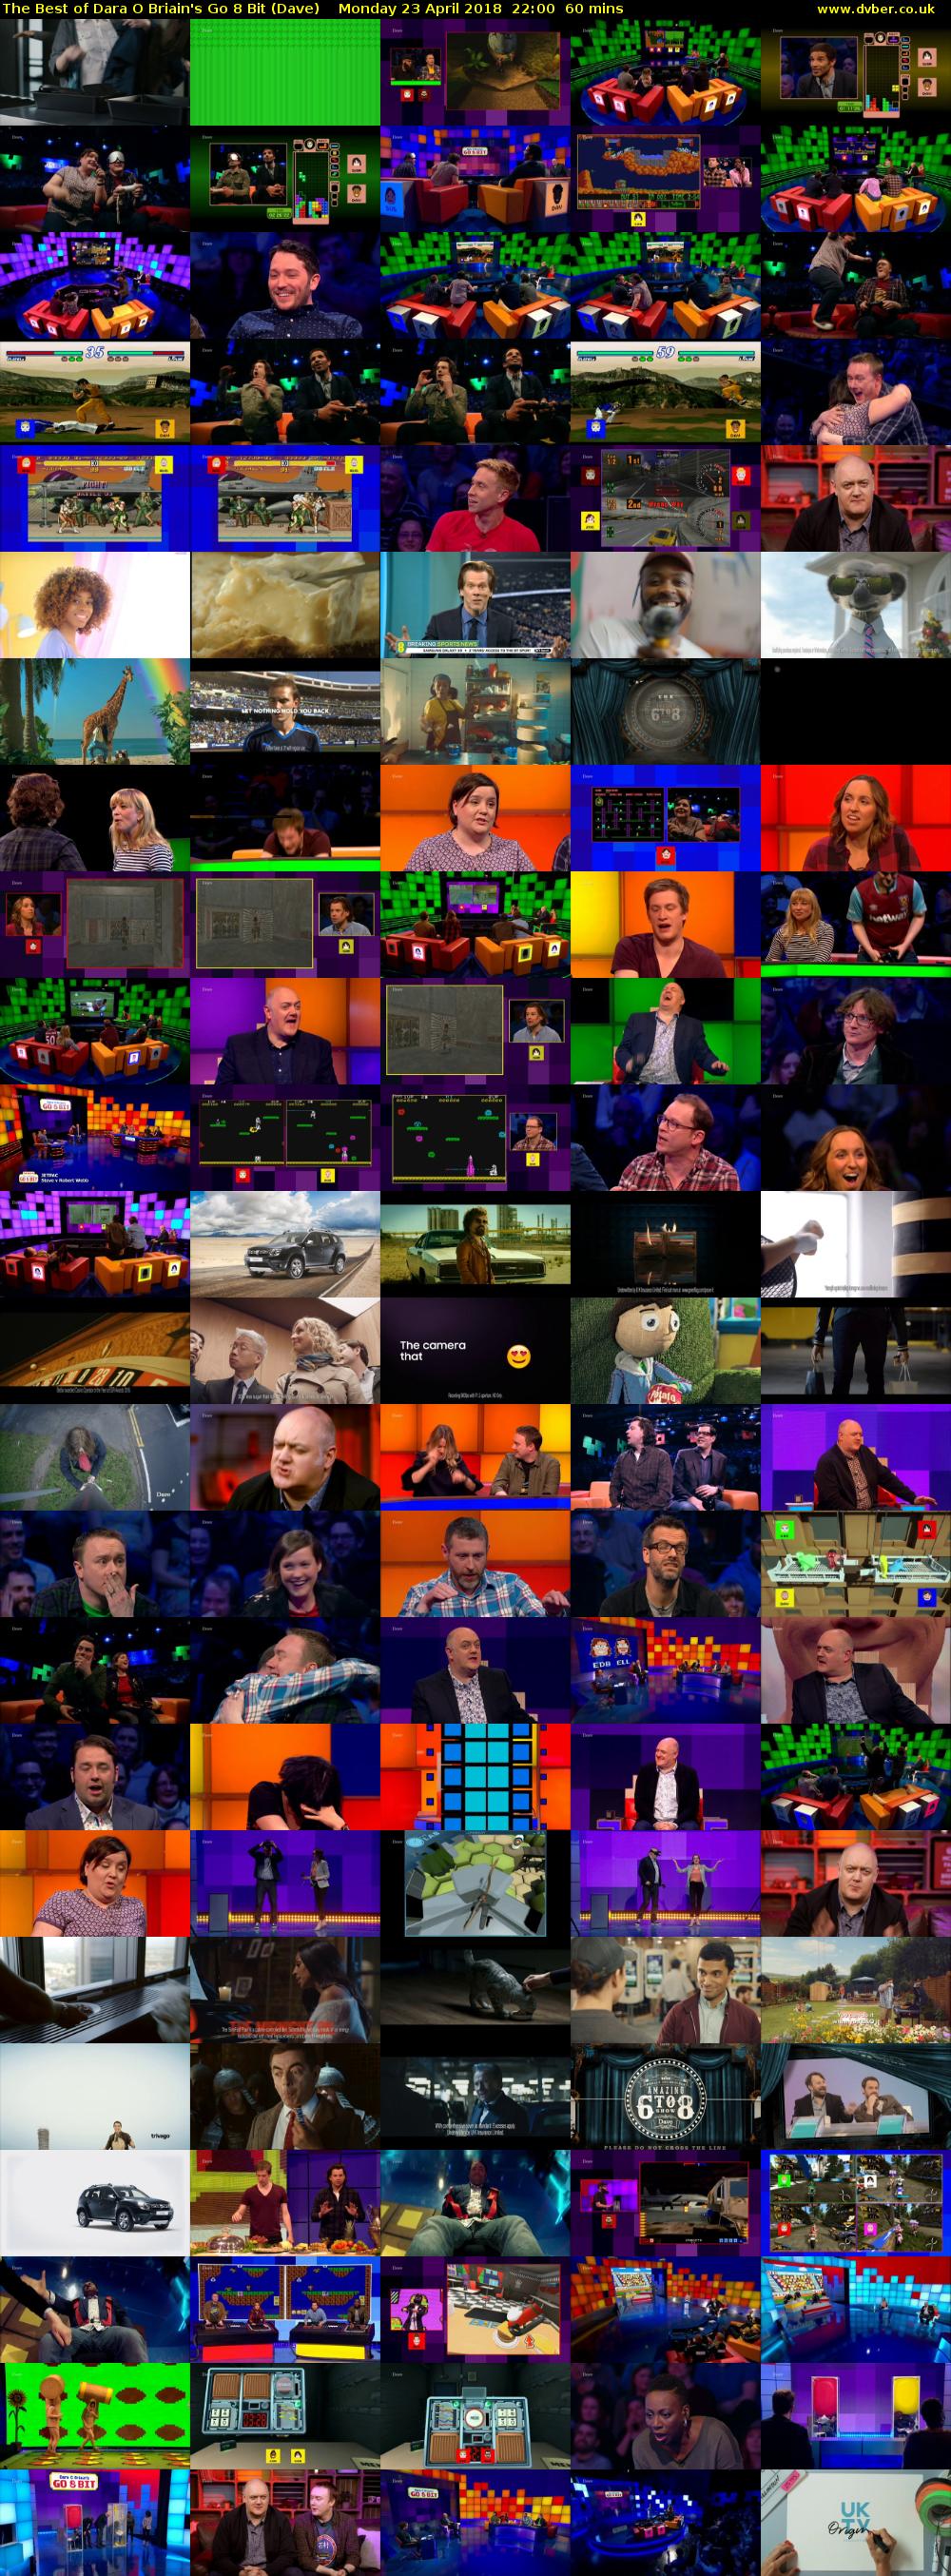 The Best of Dara O Briain's Go 8 Bit (Dave) Monday 23 April 2018 22:00 - 23:00